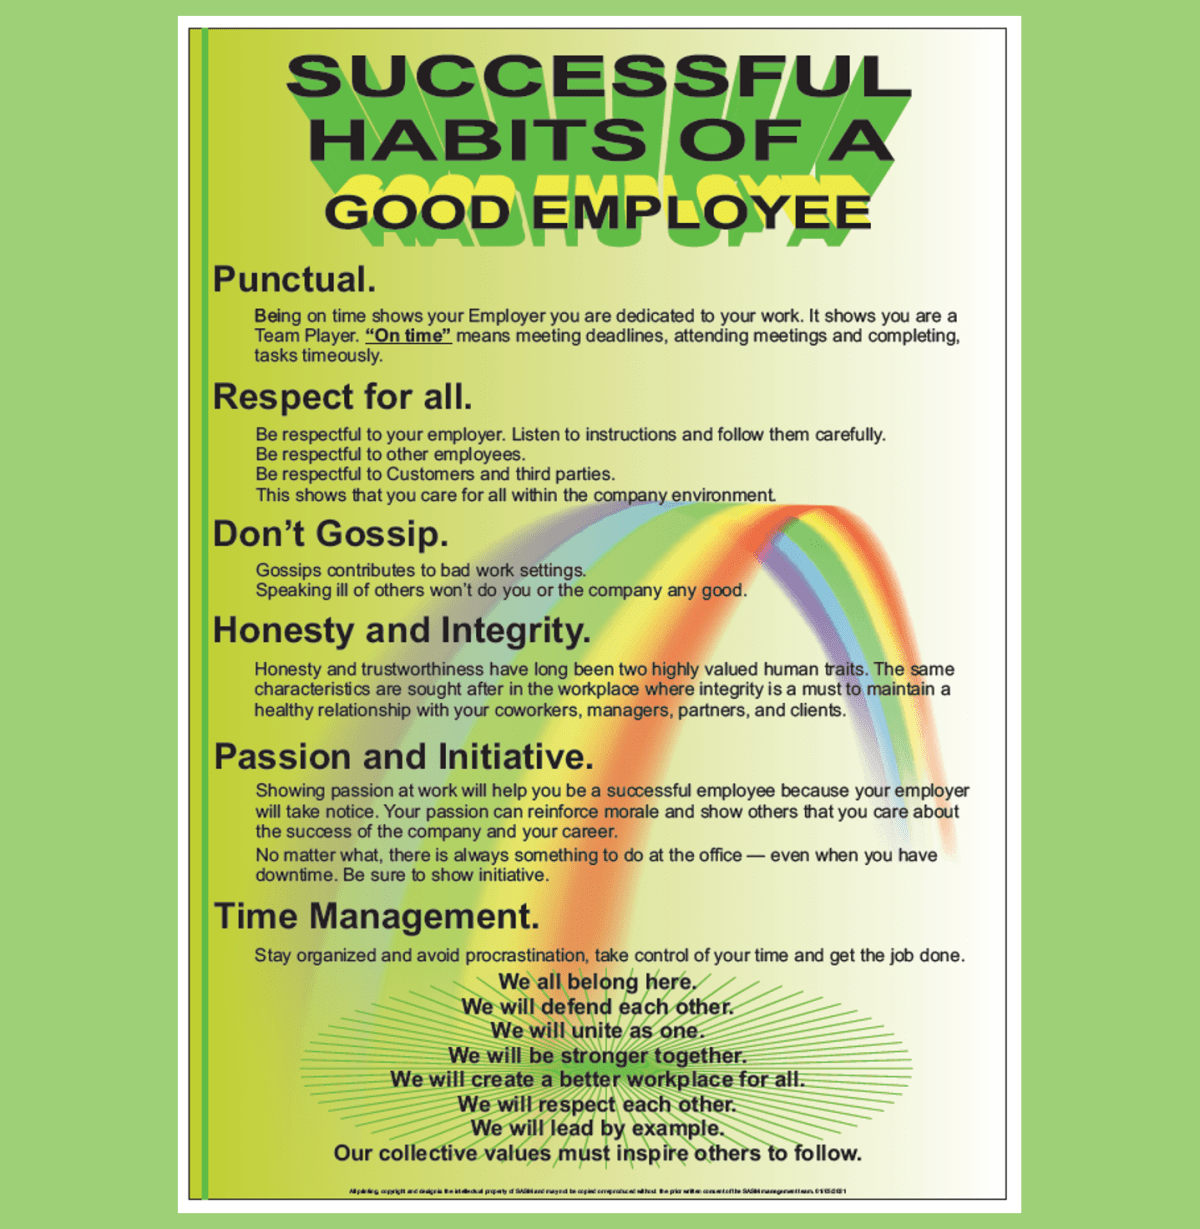 SUCCESSFUL HABITS of a GOOD EMPLOYEE